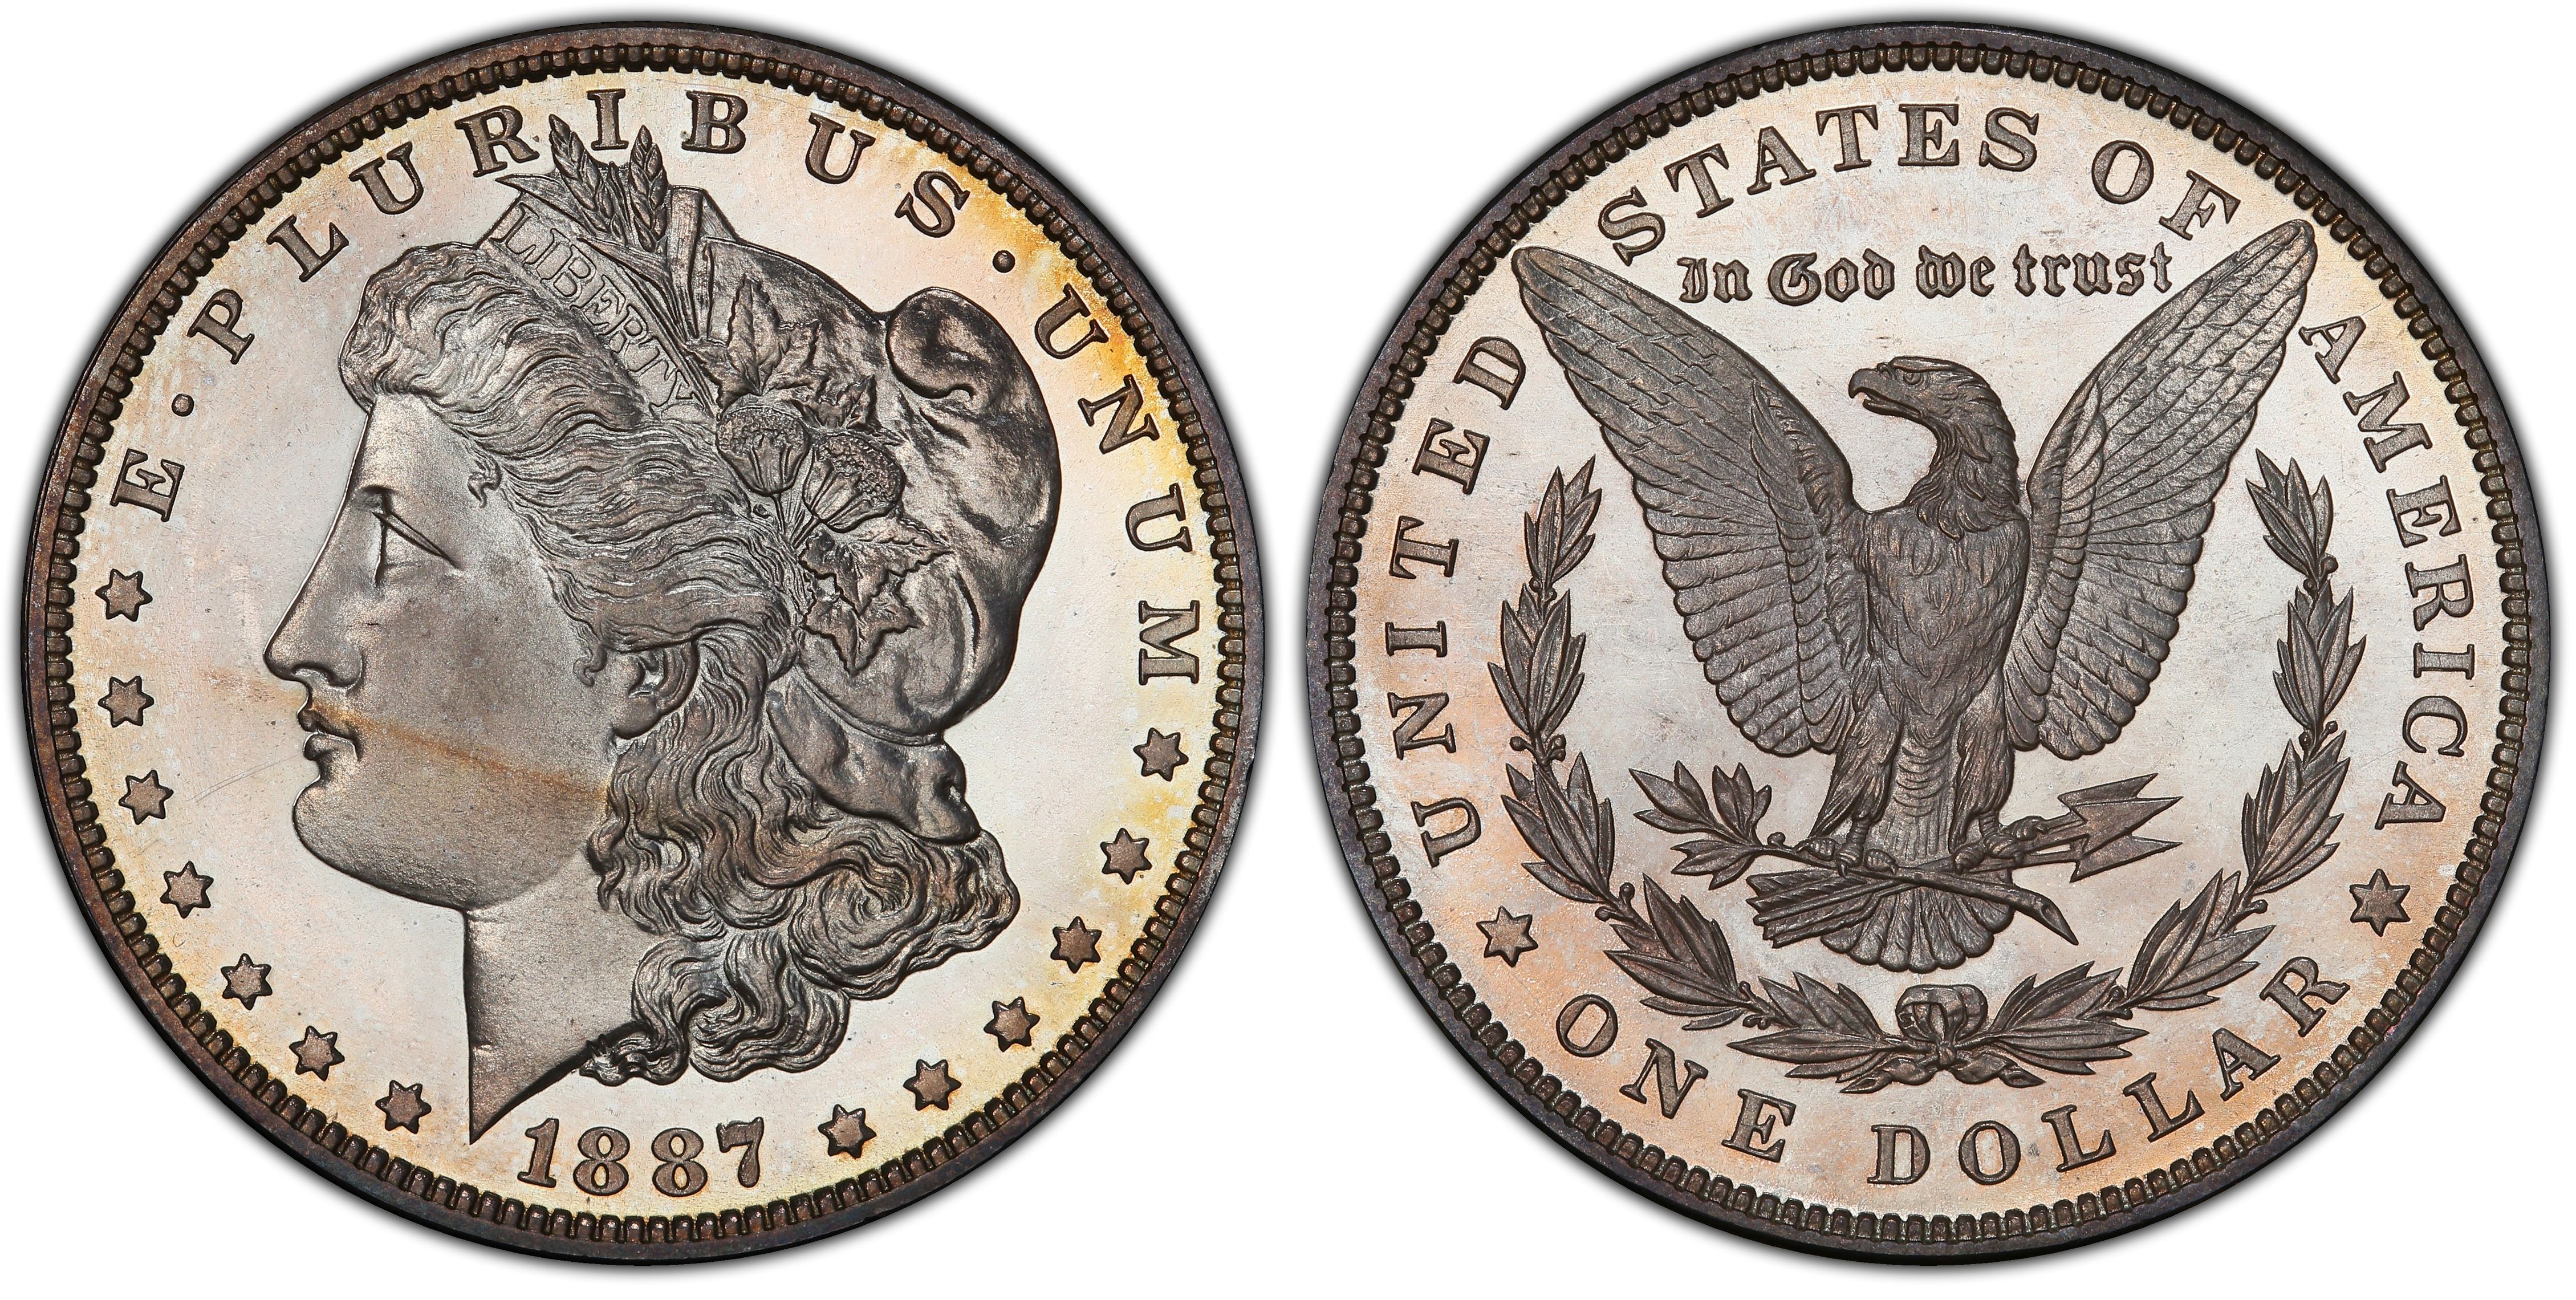 1887 $1 (Proof) Morgan Dollar - PCGS CoinFacts